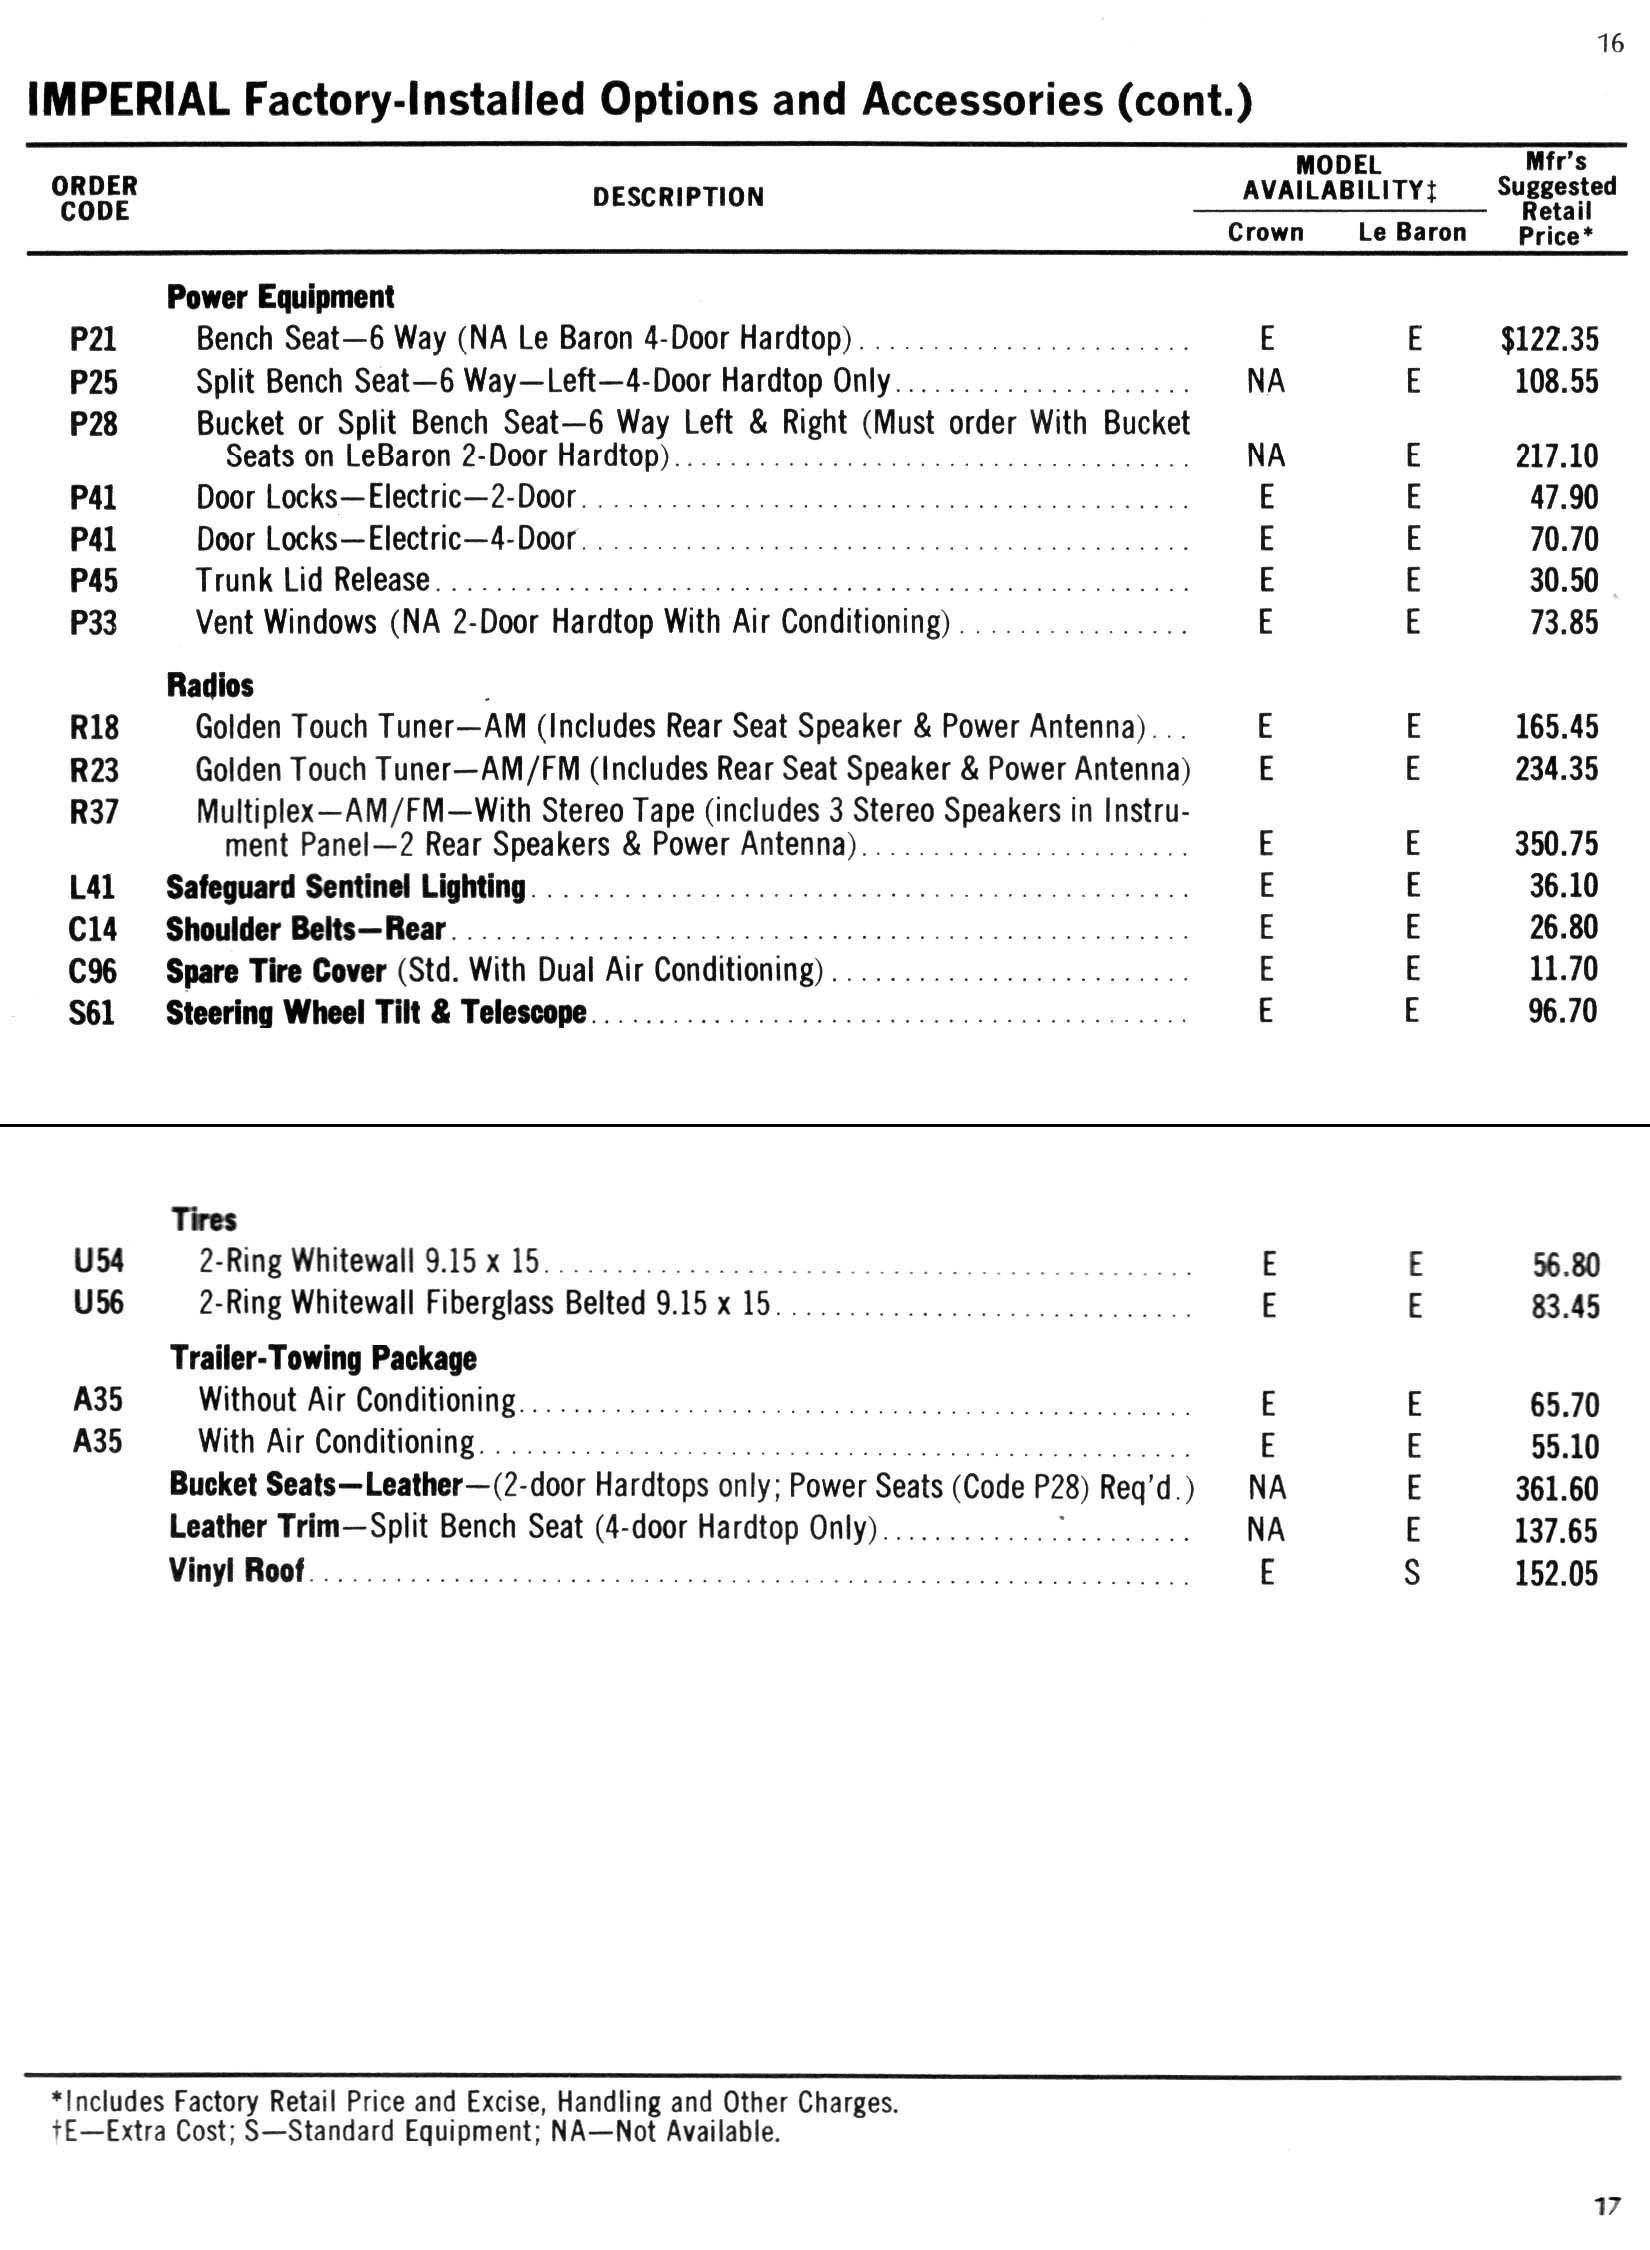 1969 Chrysler Car And Equipment Price List Page 7